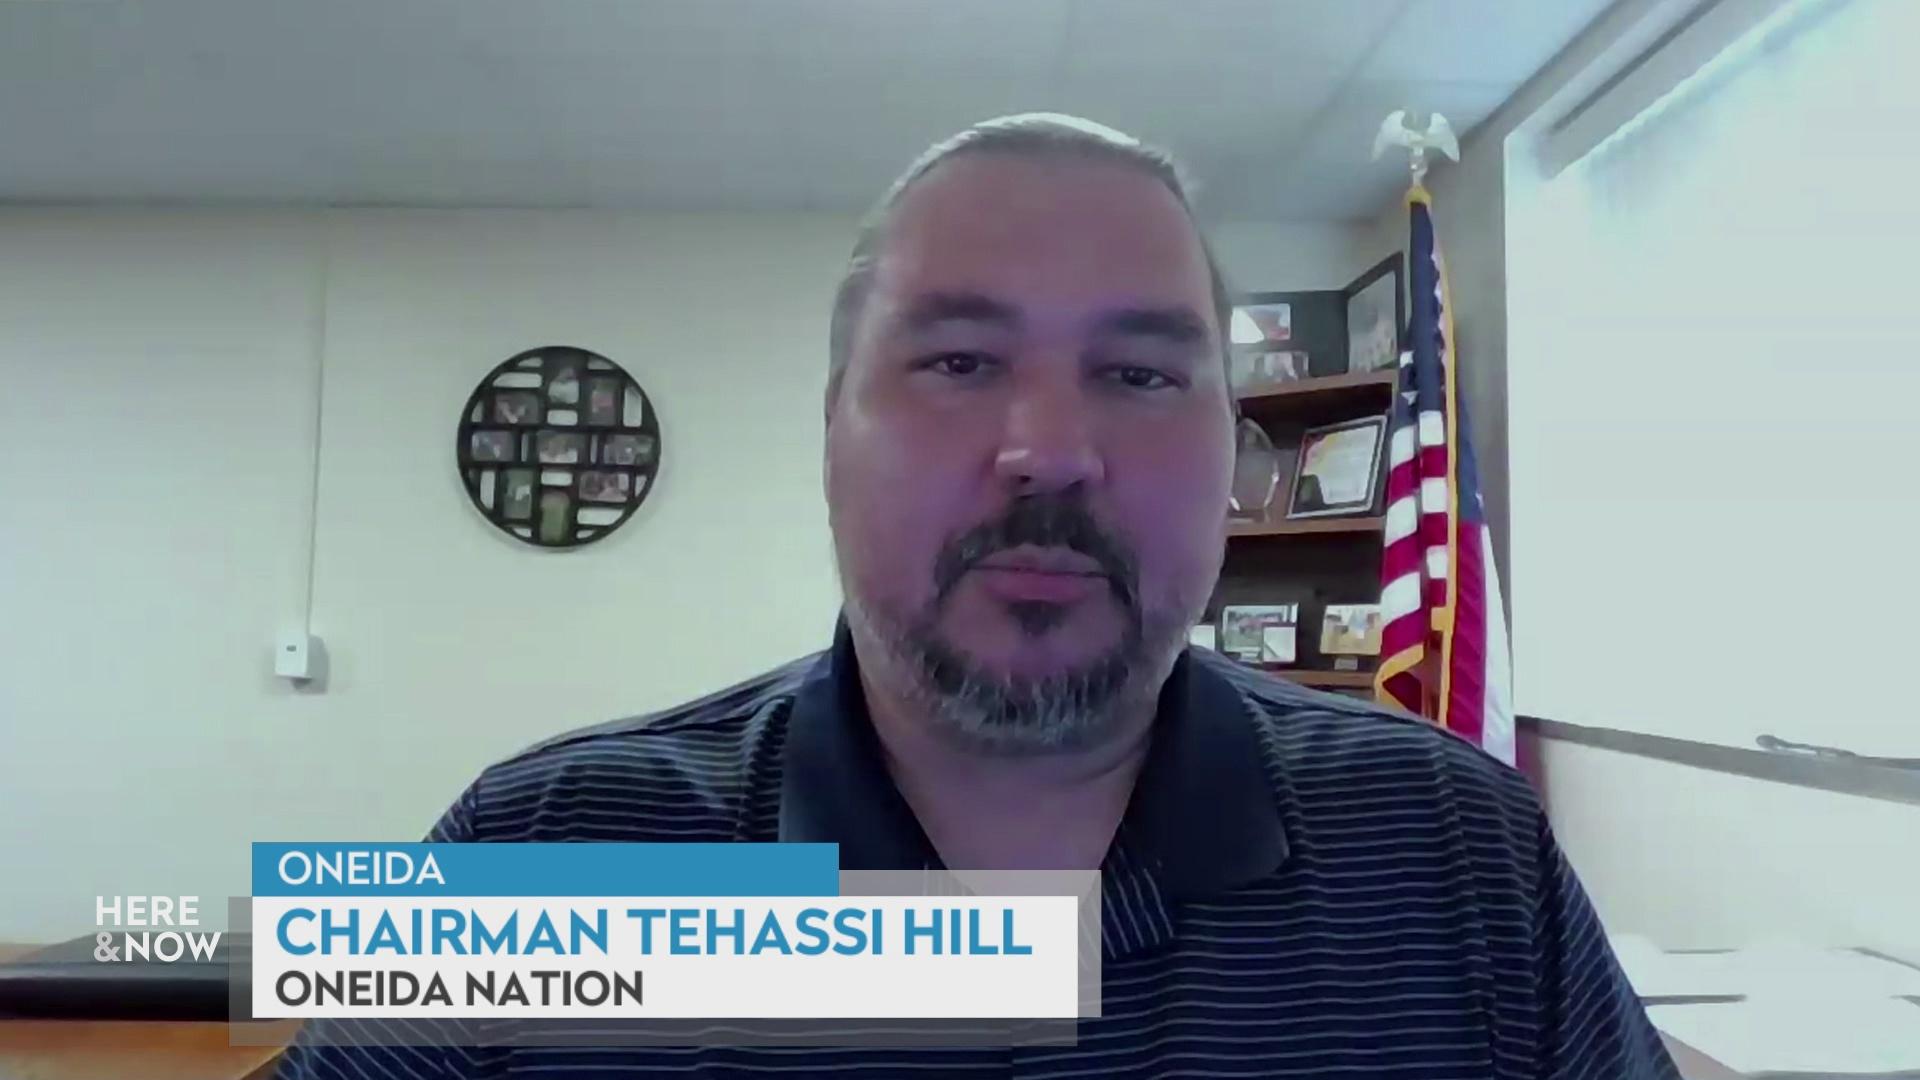 A still image from a video shows Tehassi Hill seated in front of a U.S. flag to his right and a black picture frame on a wall to his left with a graphic at bottom reading 'Oneida,' 'Chairman Tehassi Hill' and 'Oneida Nation.'